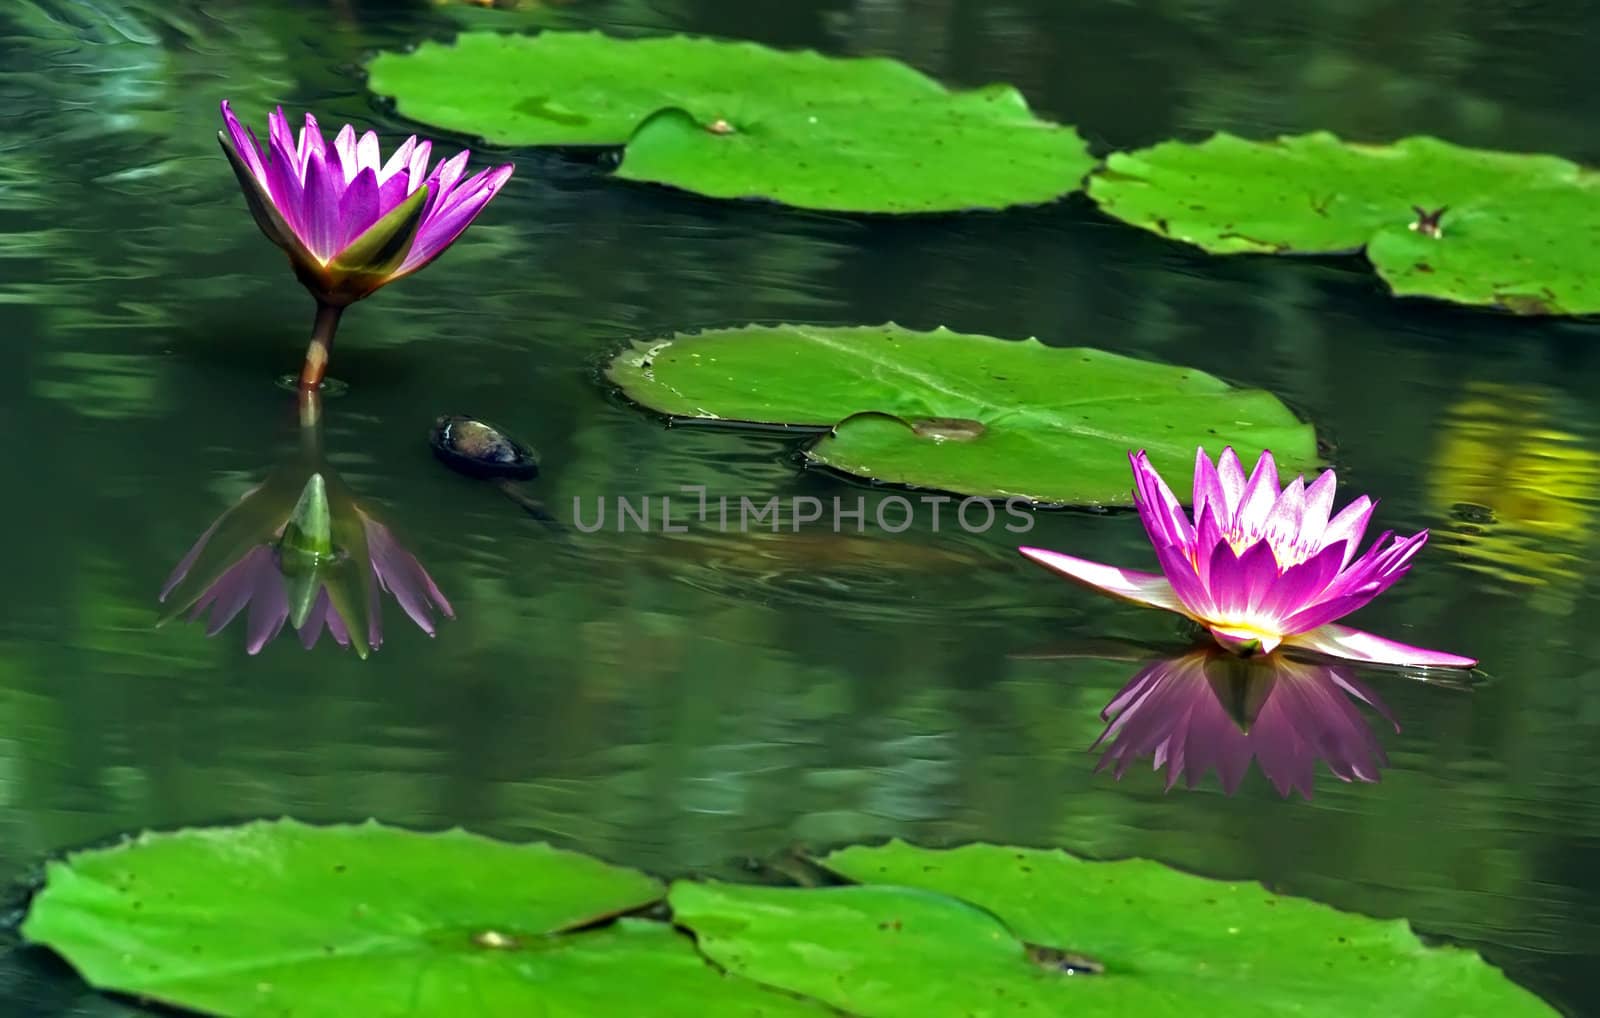 Water lily in full bloom in the pond by xfdly5